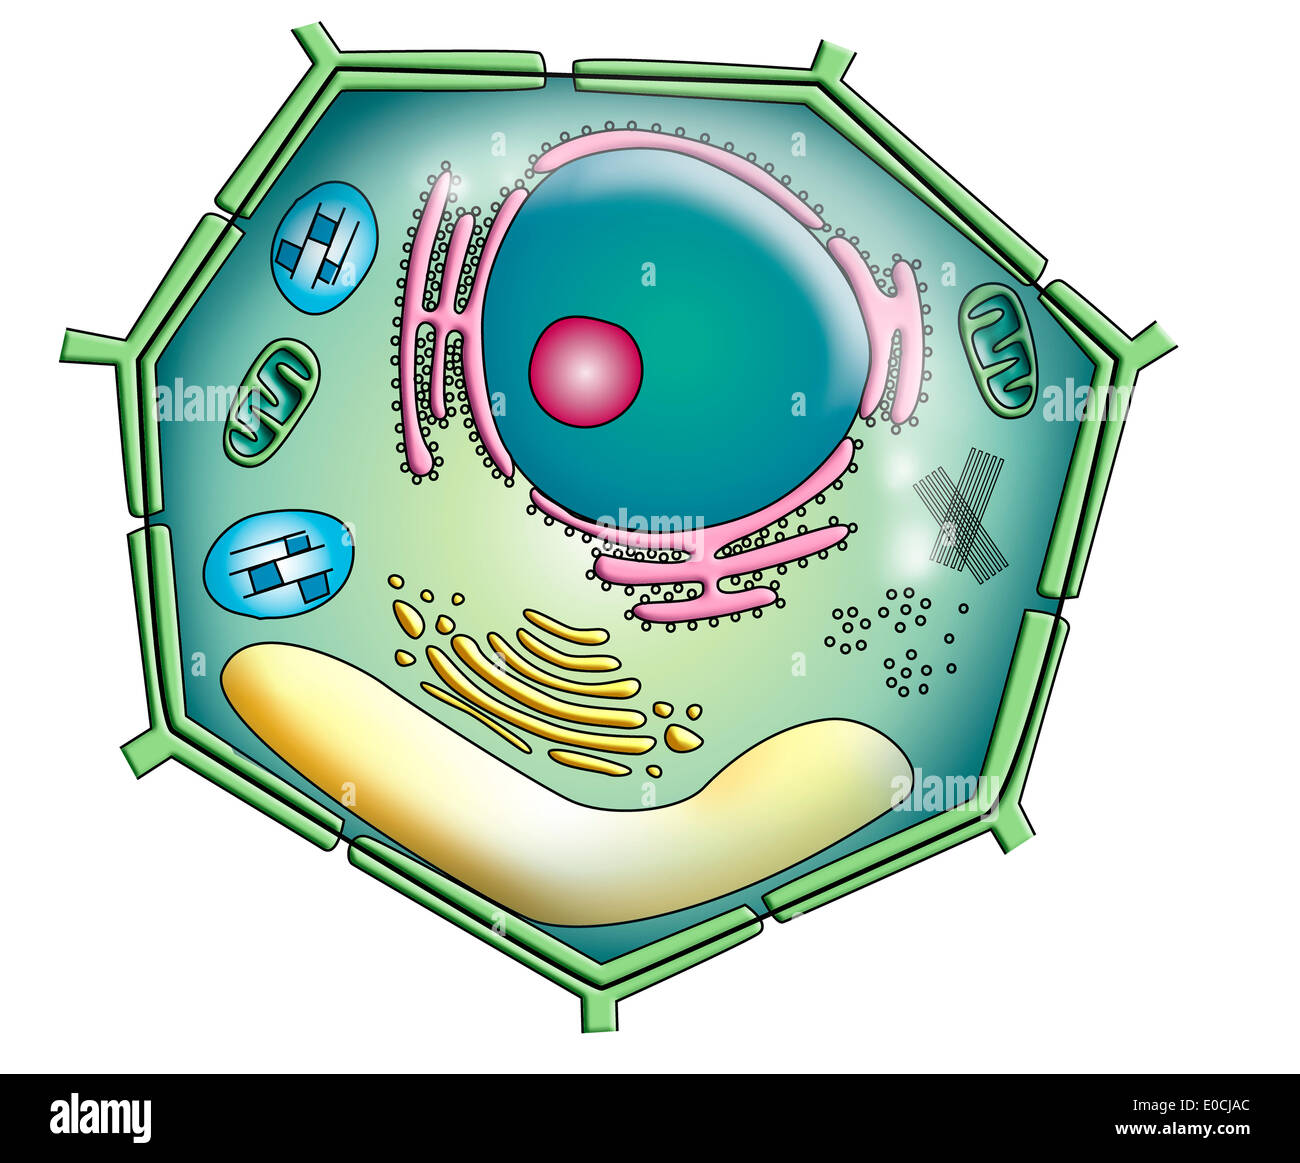 Plant cell hi-res stock photography and images - Alamy